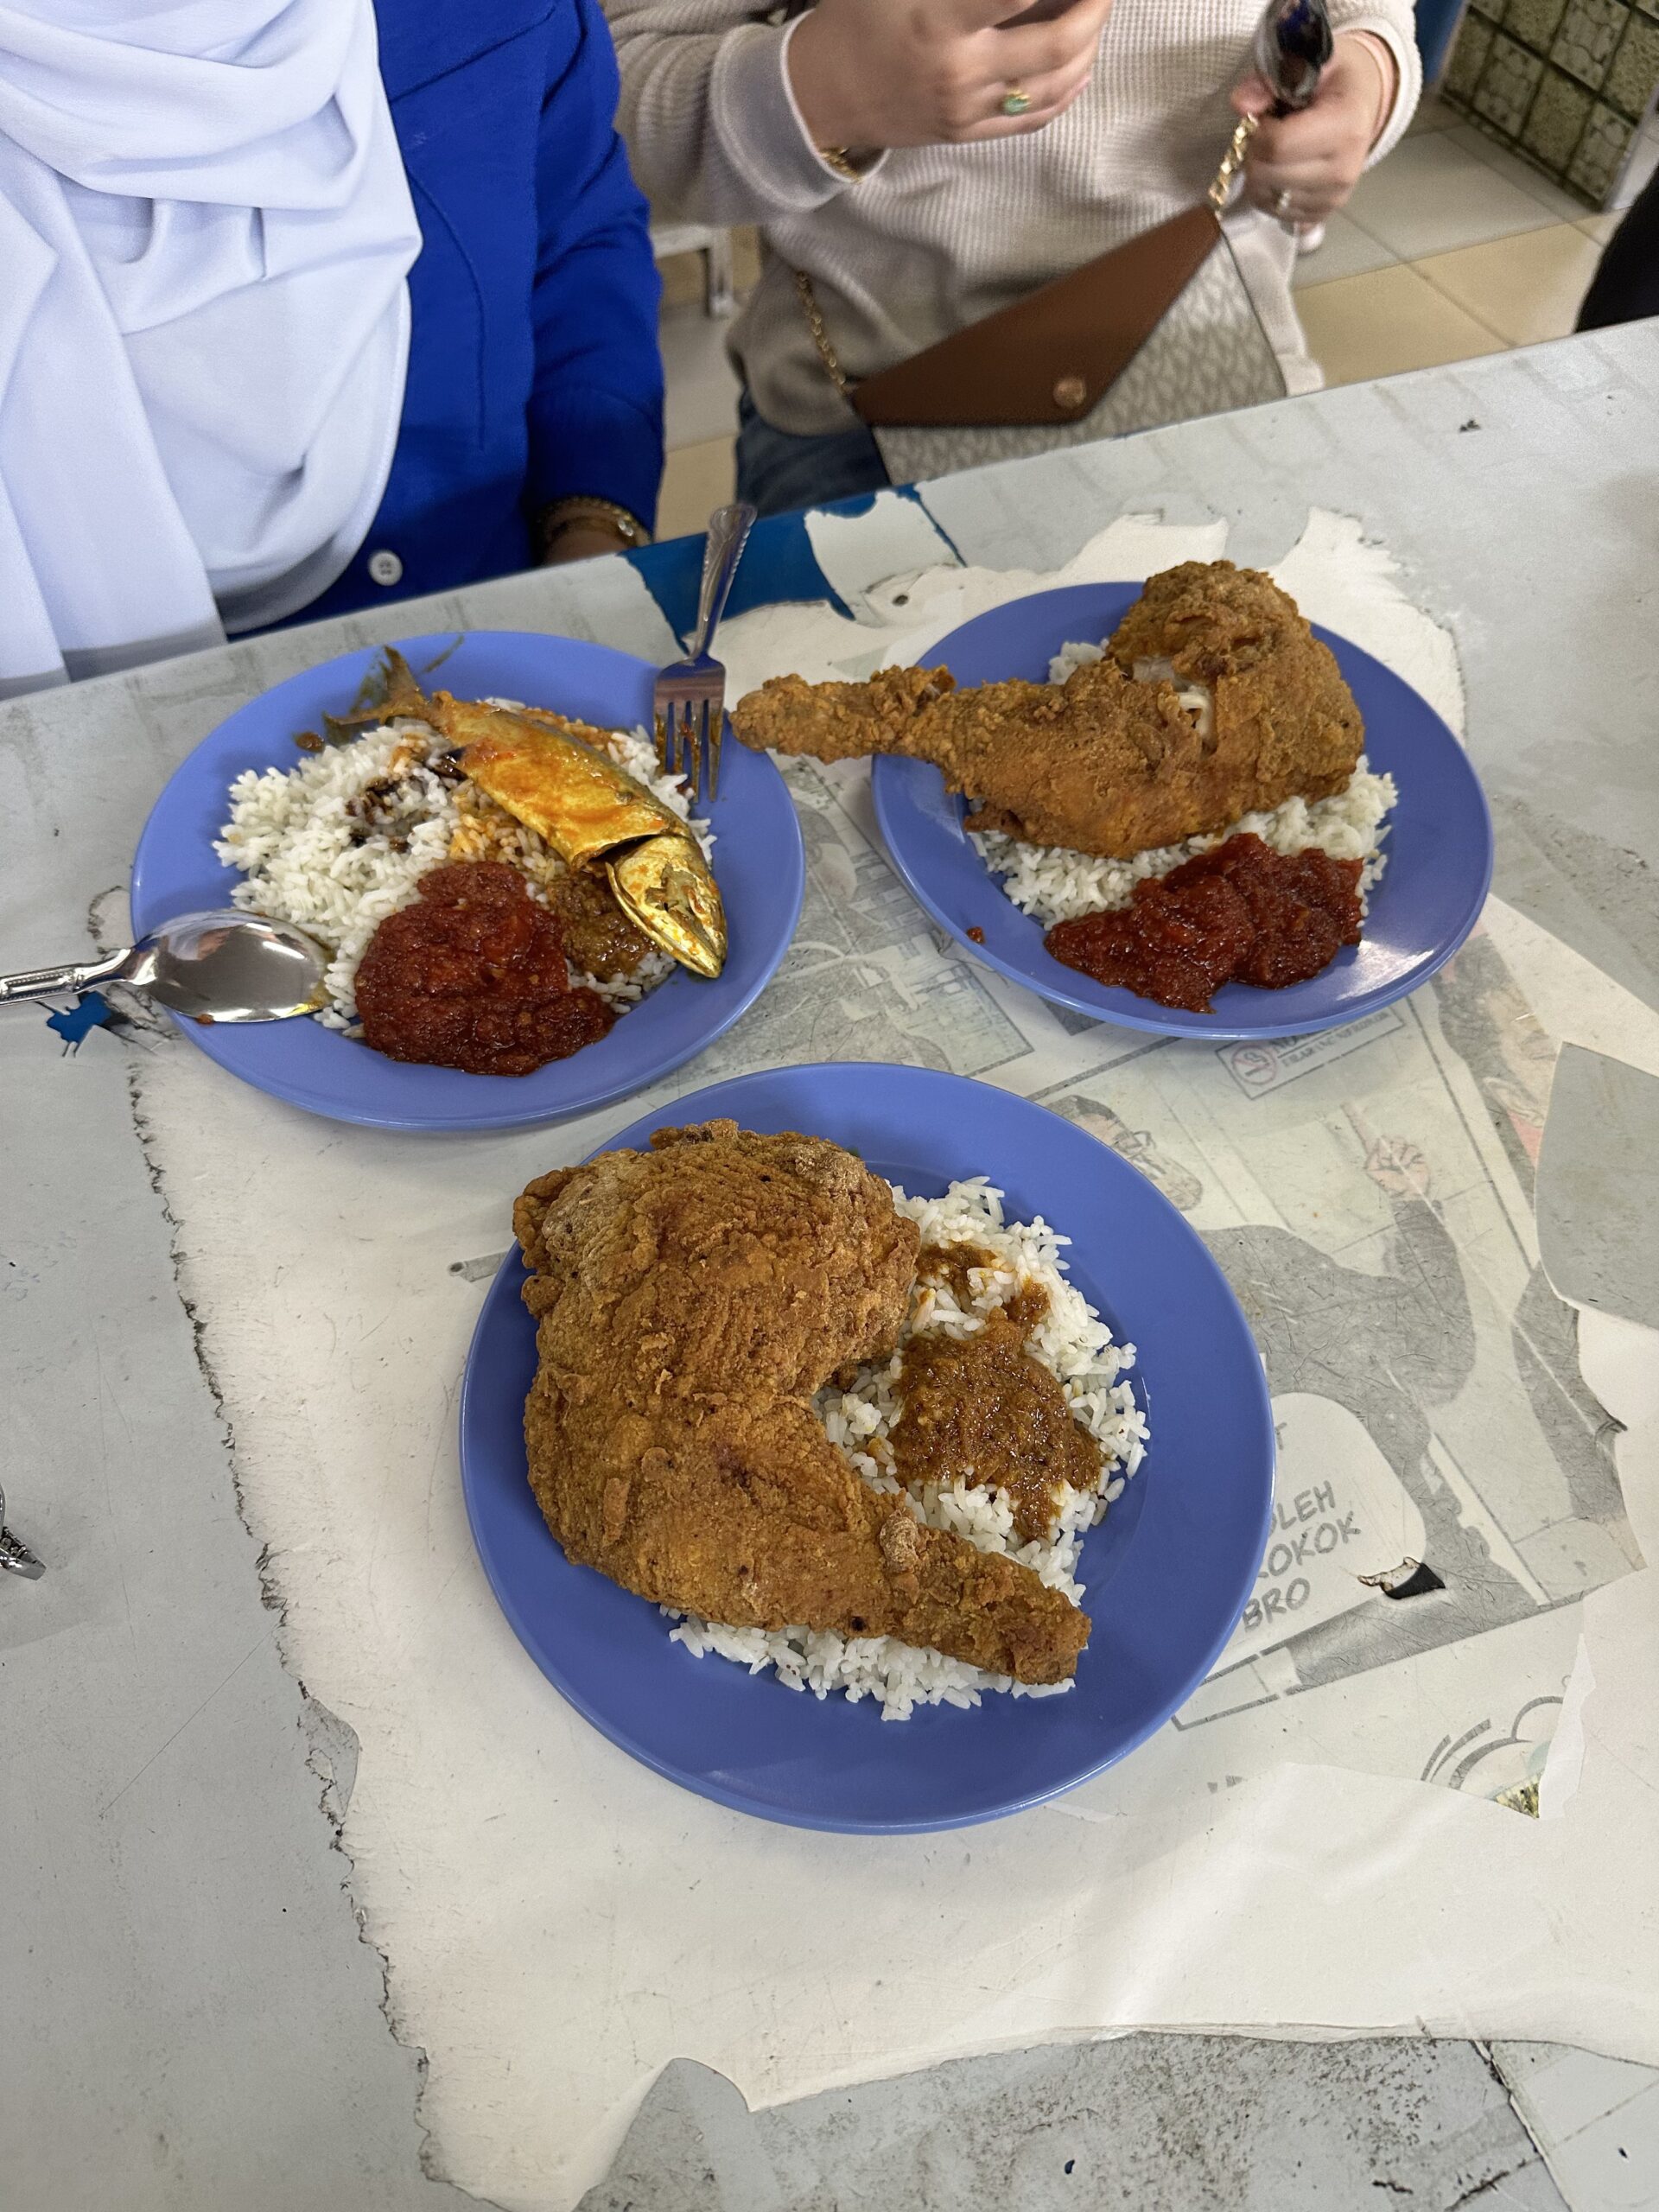 3 meals in perlis cost rm15 : 2 huge chickens with 1 fried fish along with rice and sambal.